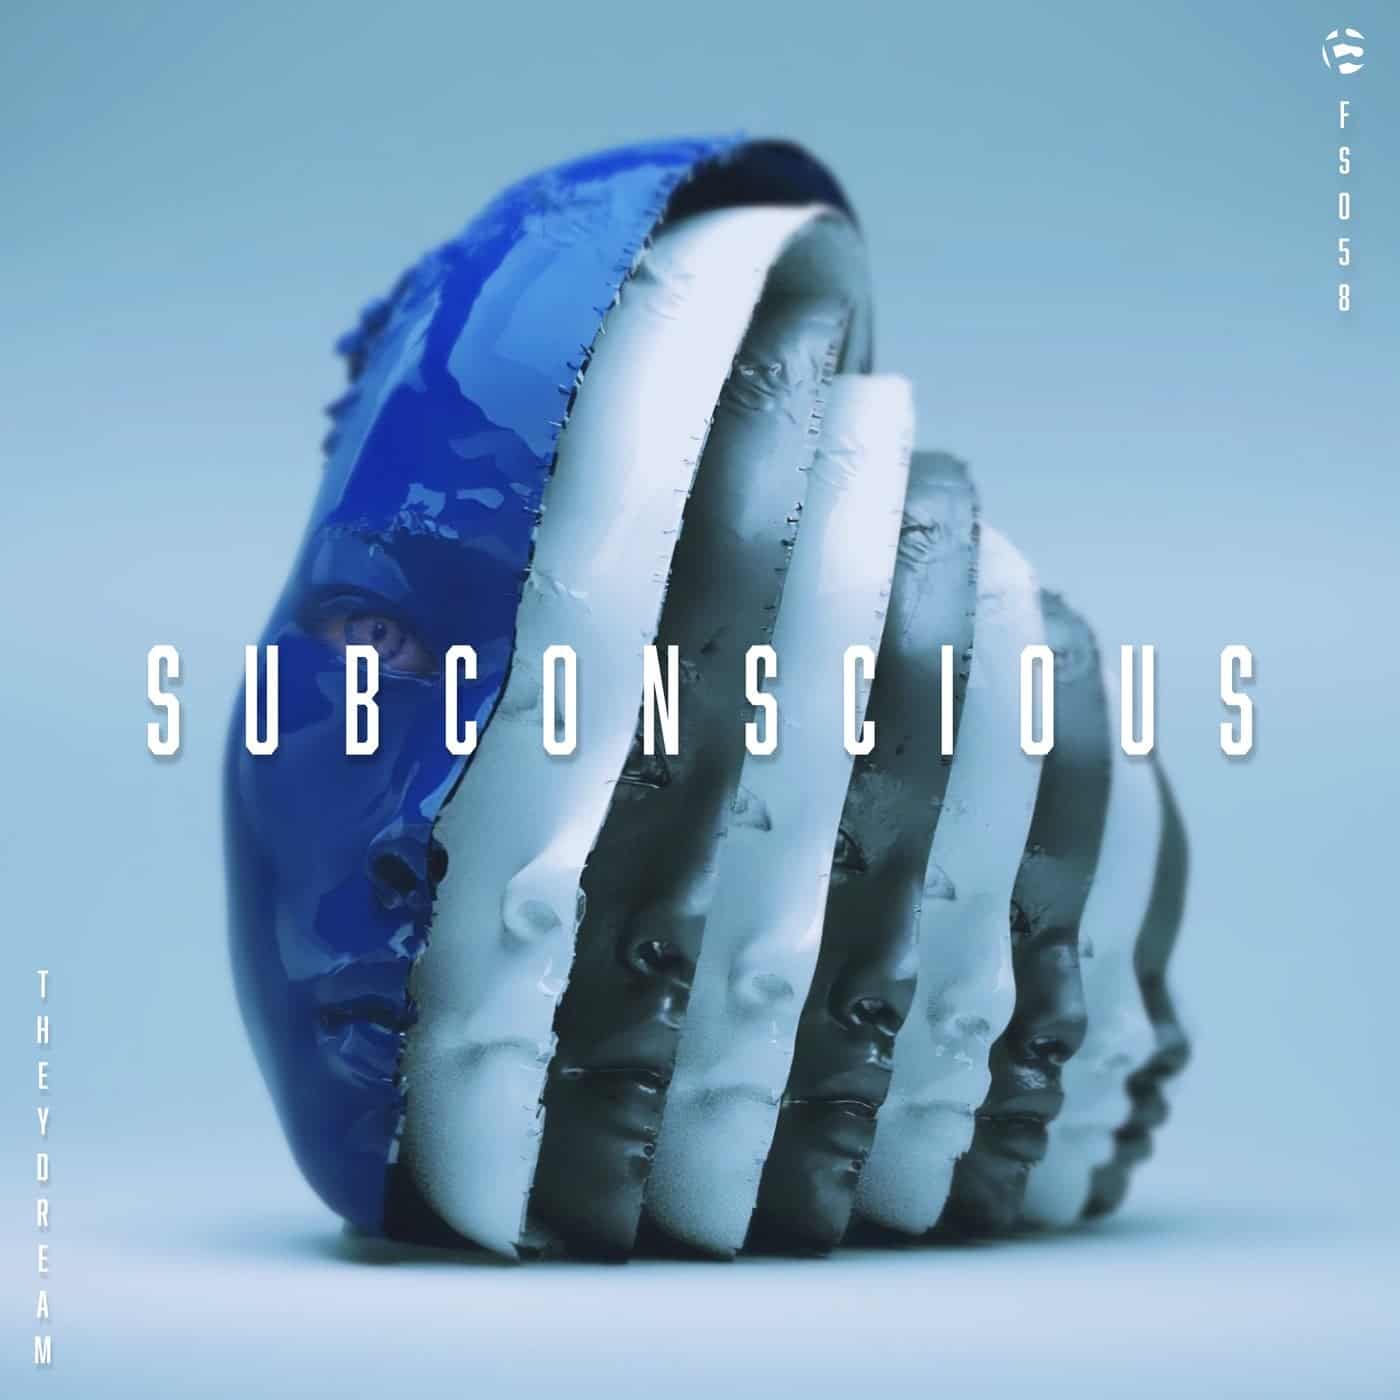 Download Theydream - Subconscious on Electrobuzz